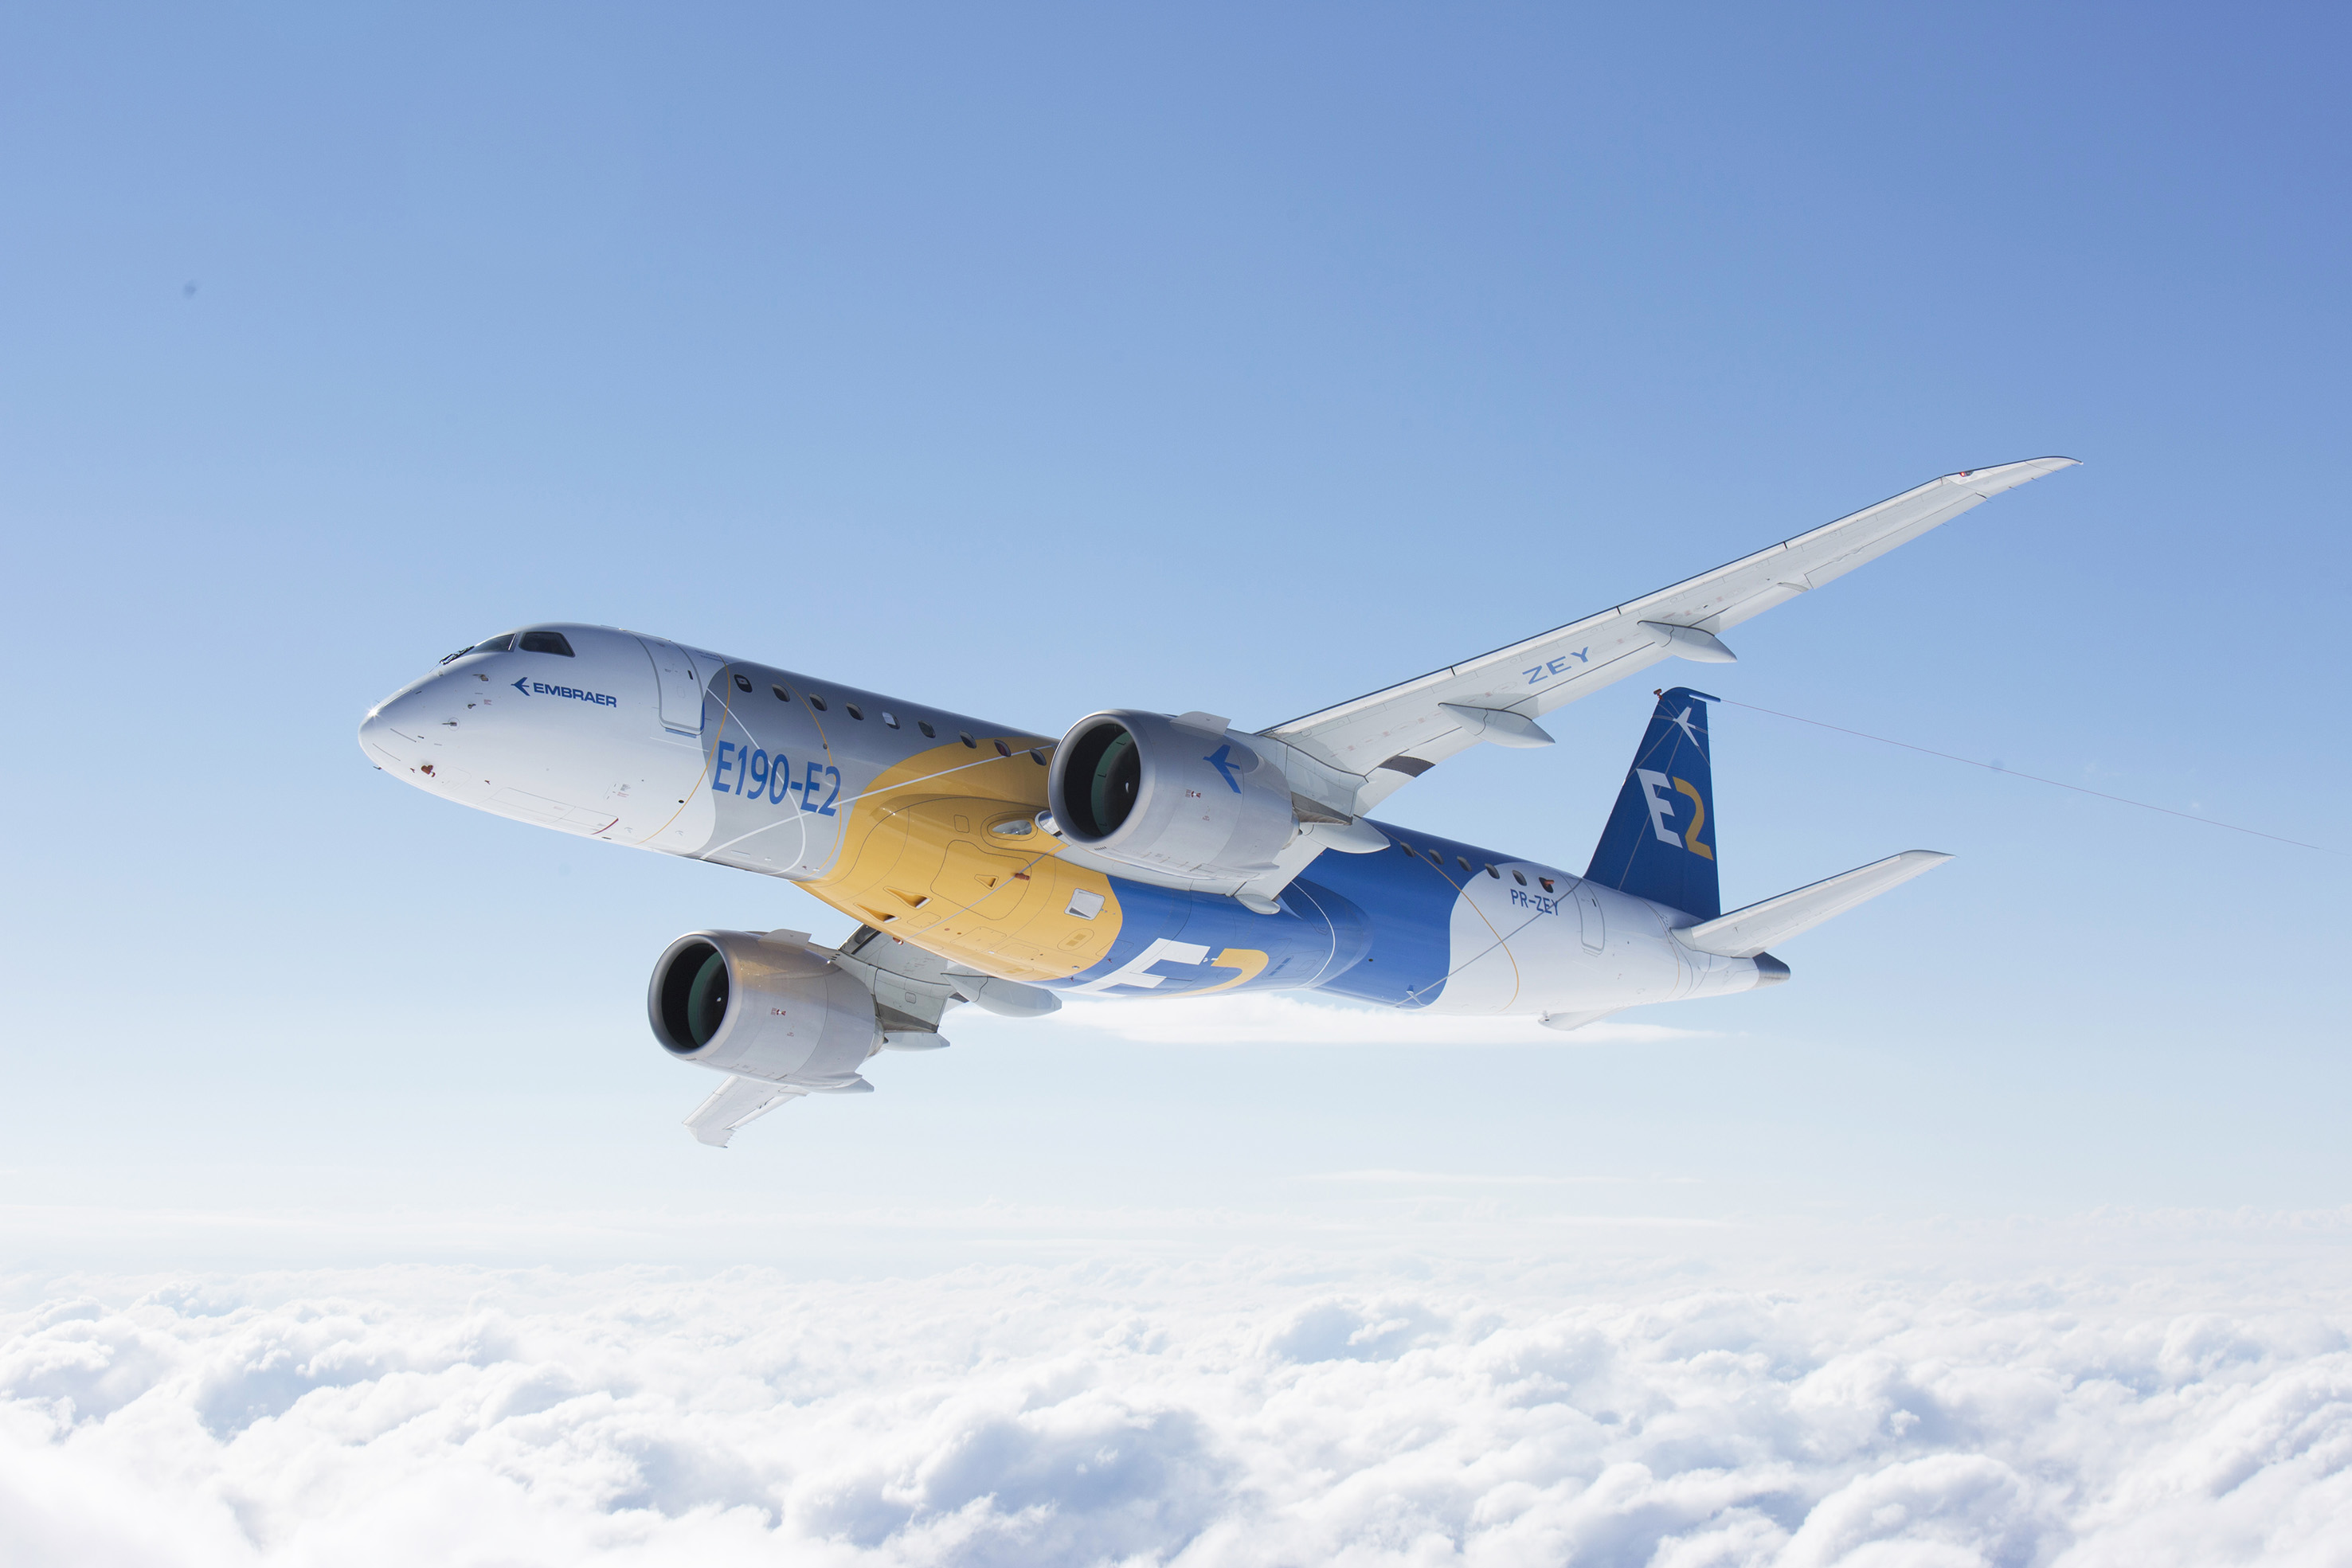 Embraer announces the completion of maiden flight of the E190-E2 